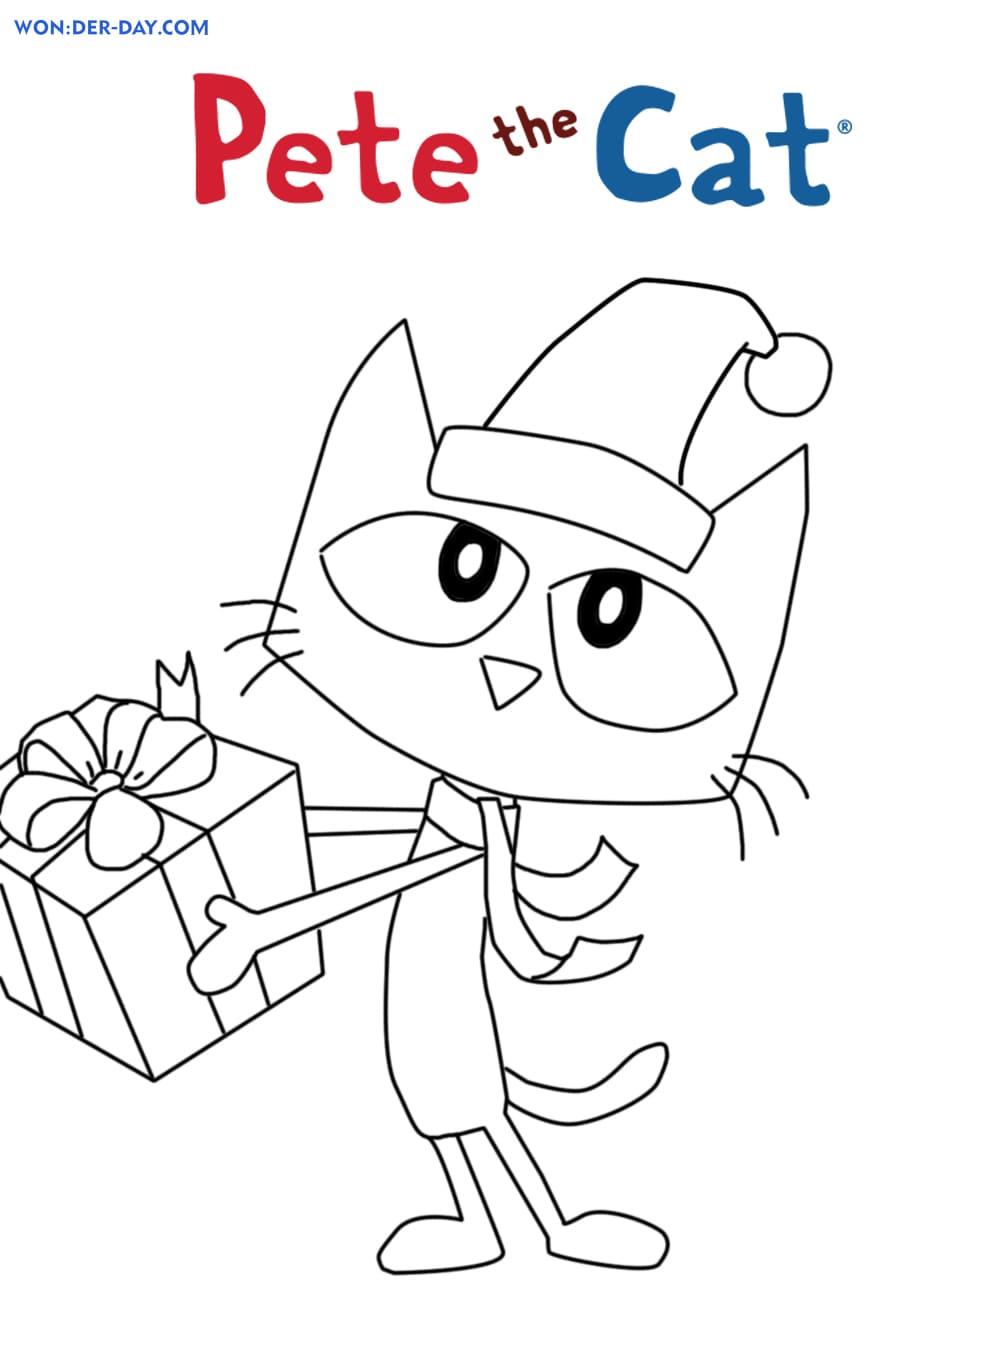 Pete The Cat Coloring Page Free Printable